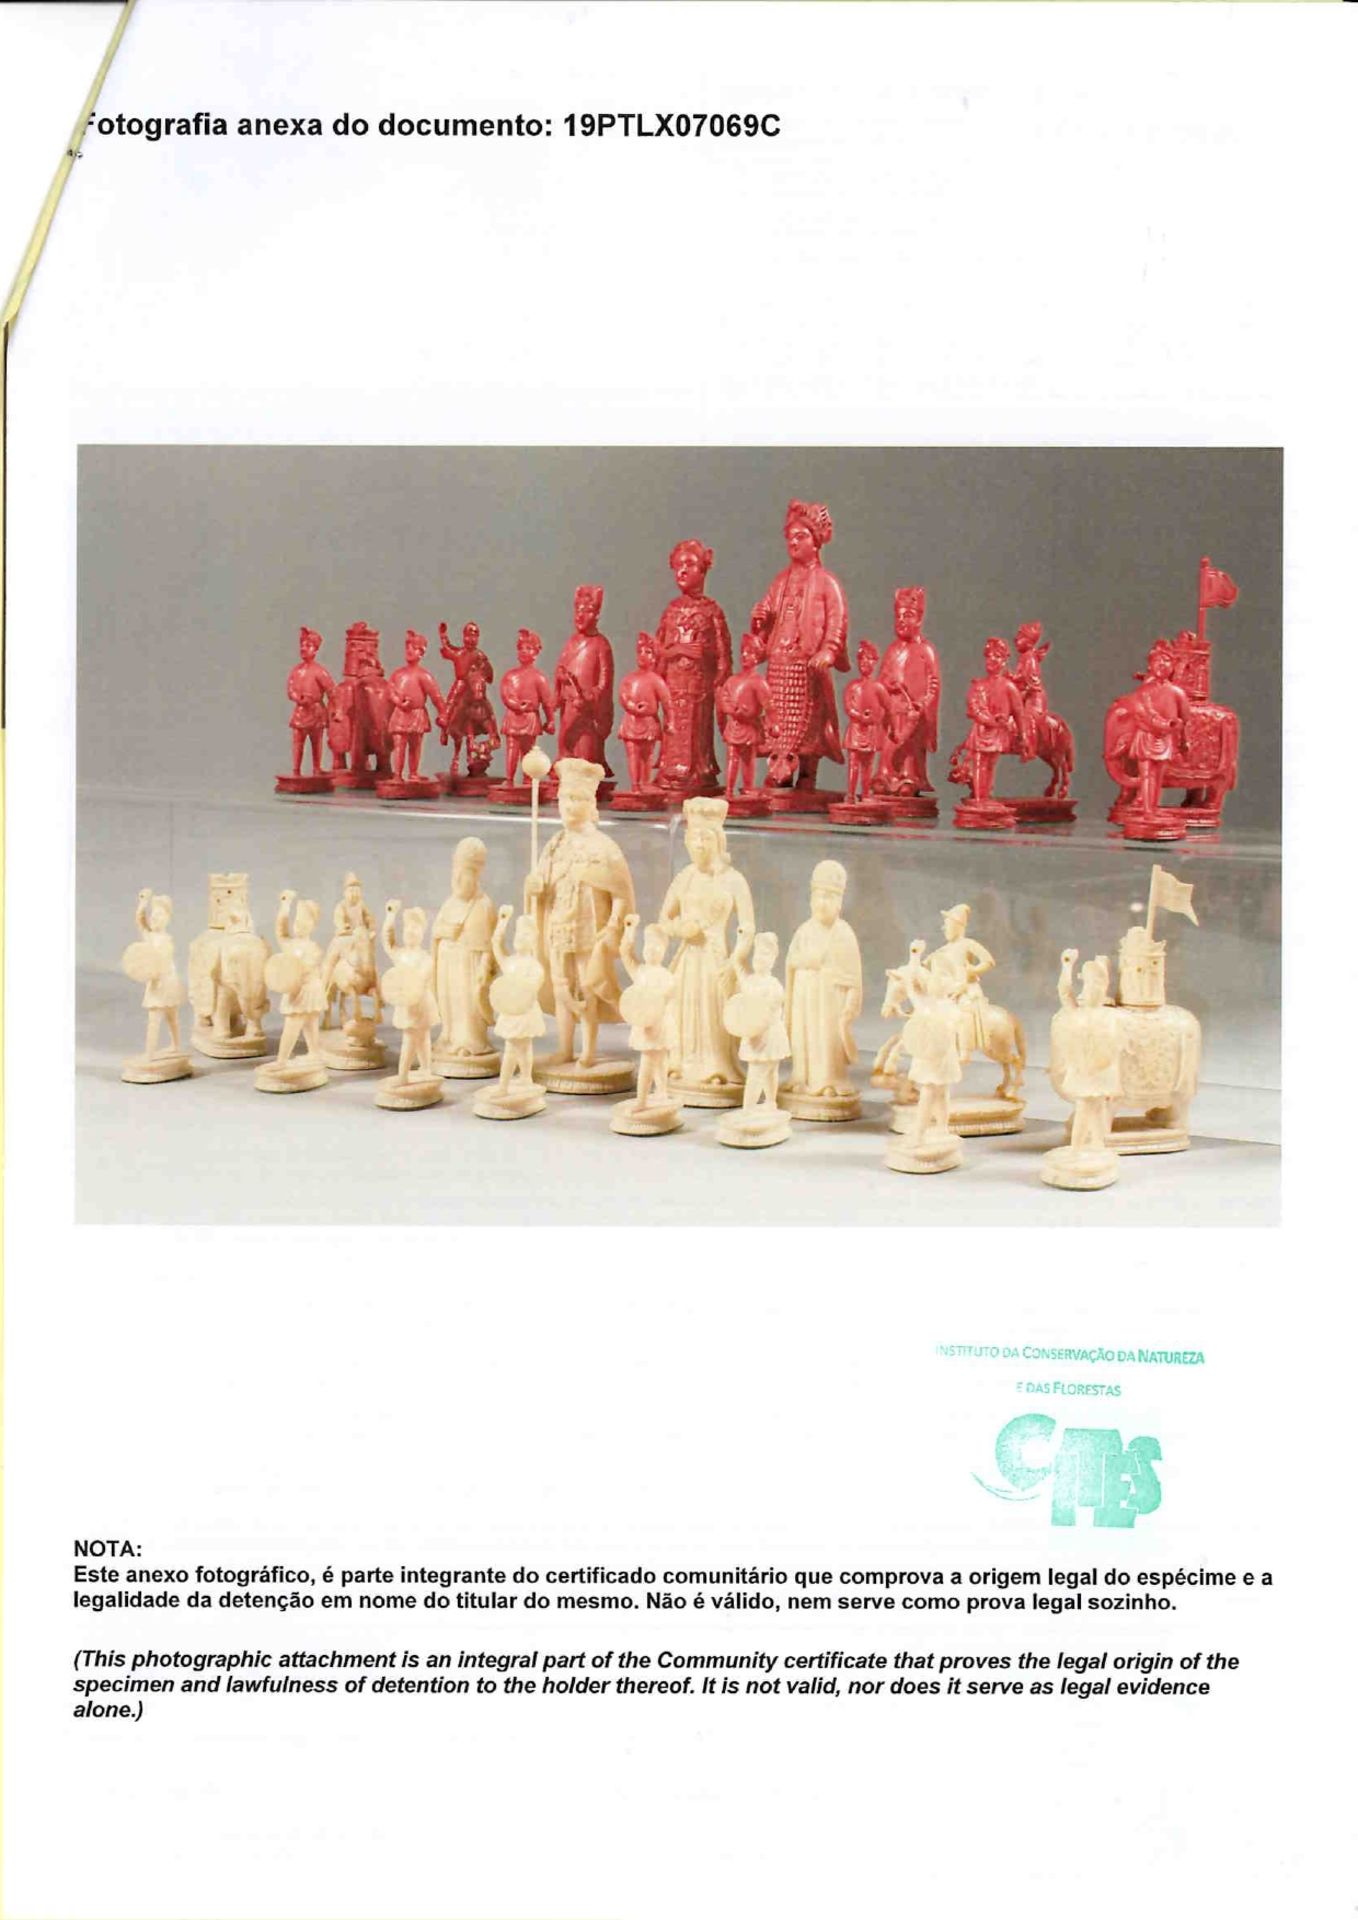 Chess pieces - Image 8 of 8